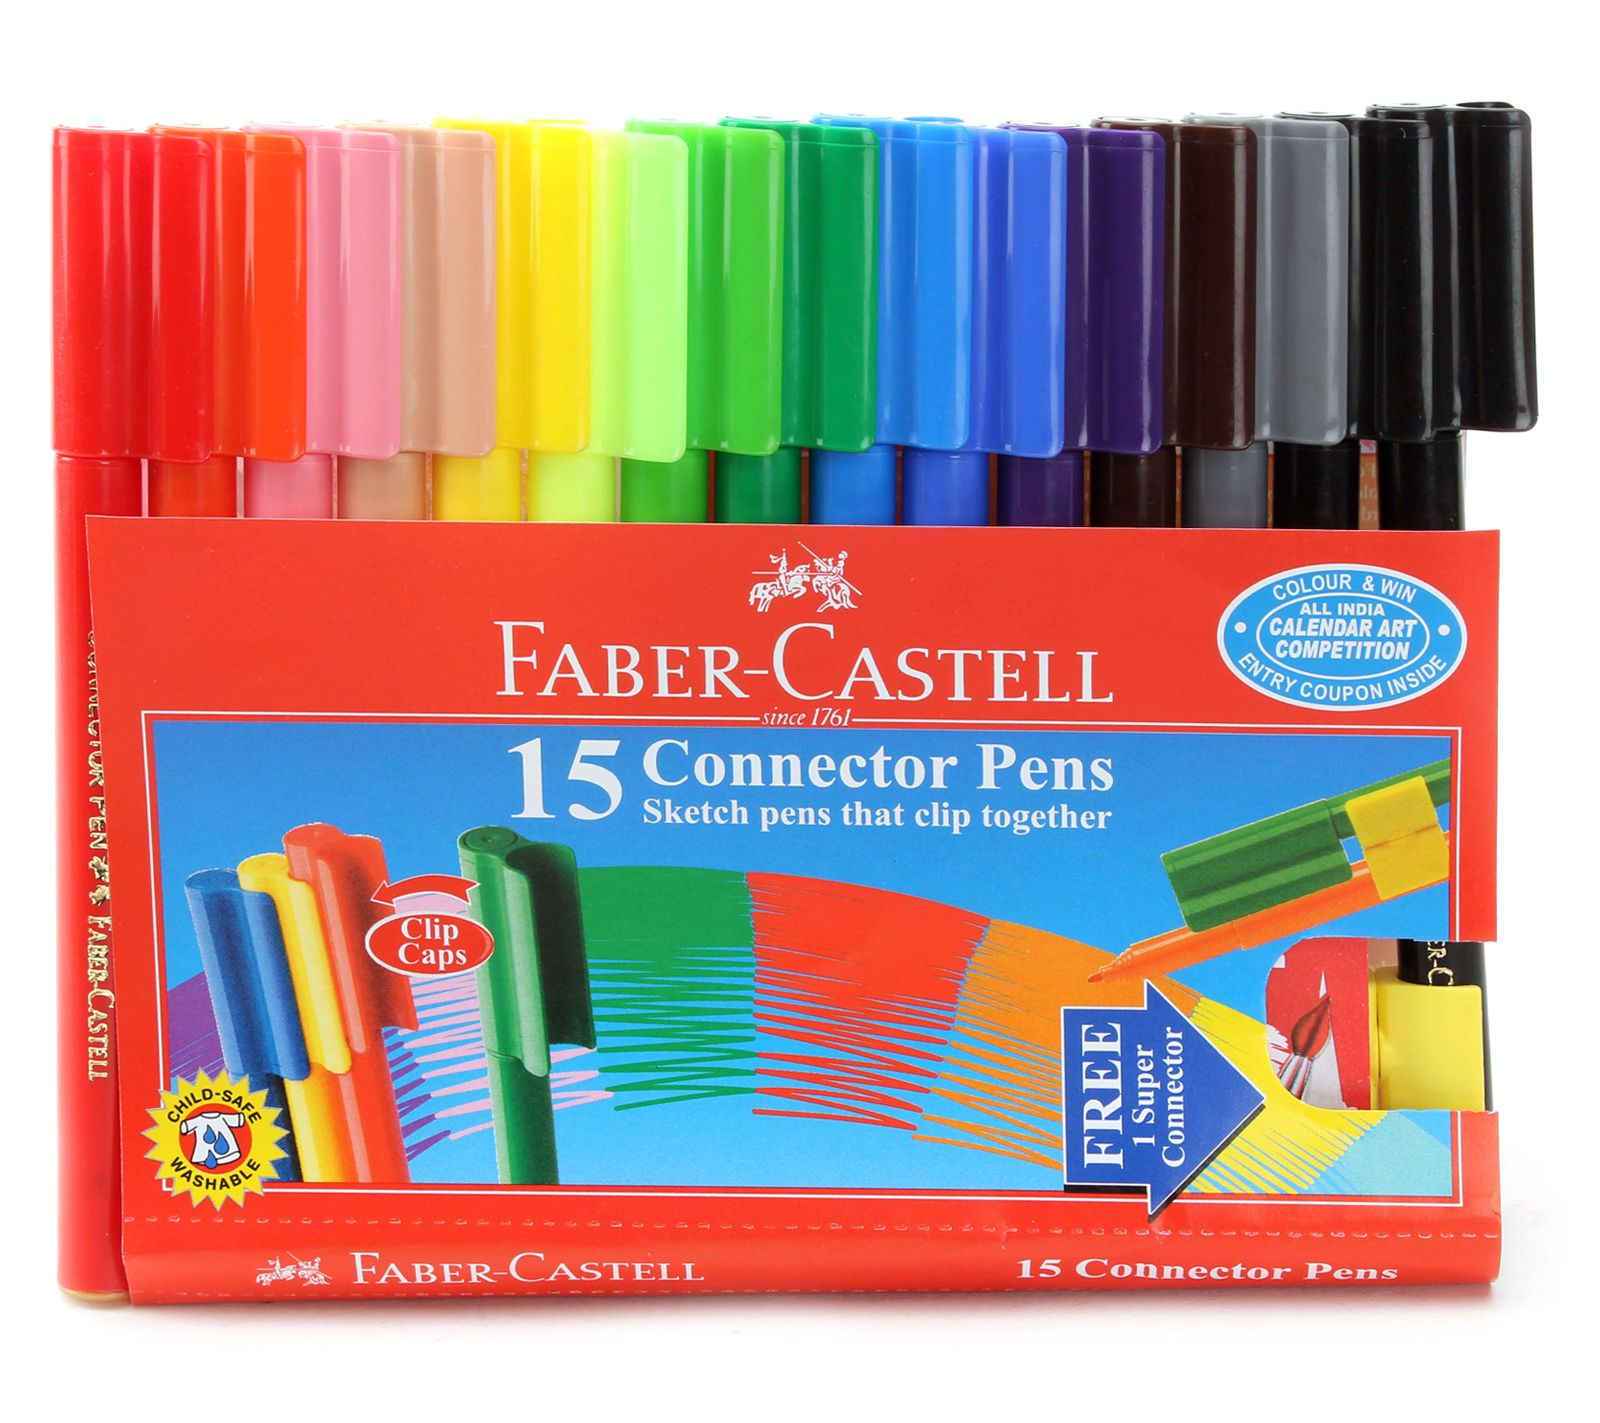 Buy Faber Castell Connector Sketch Pen Set 50 Shades Online  Sketch Pens   Arts  Crafts  Hobbies  Pepperfry Product